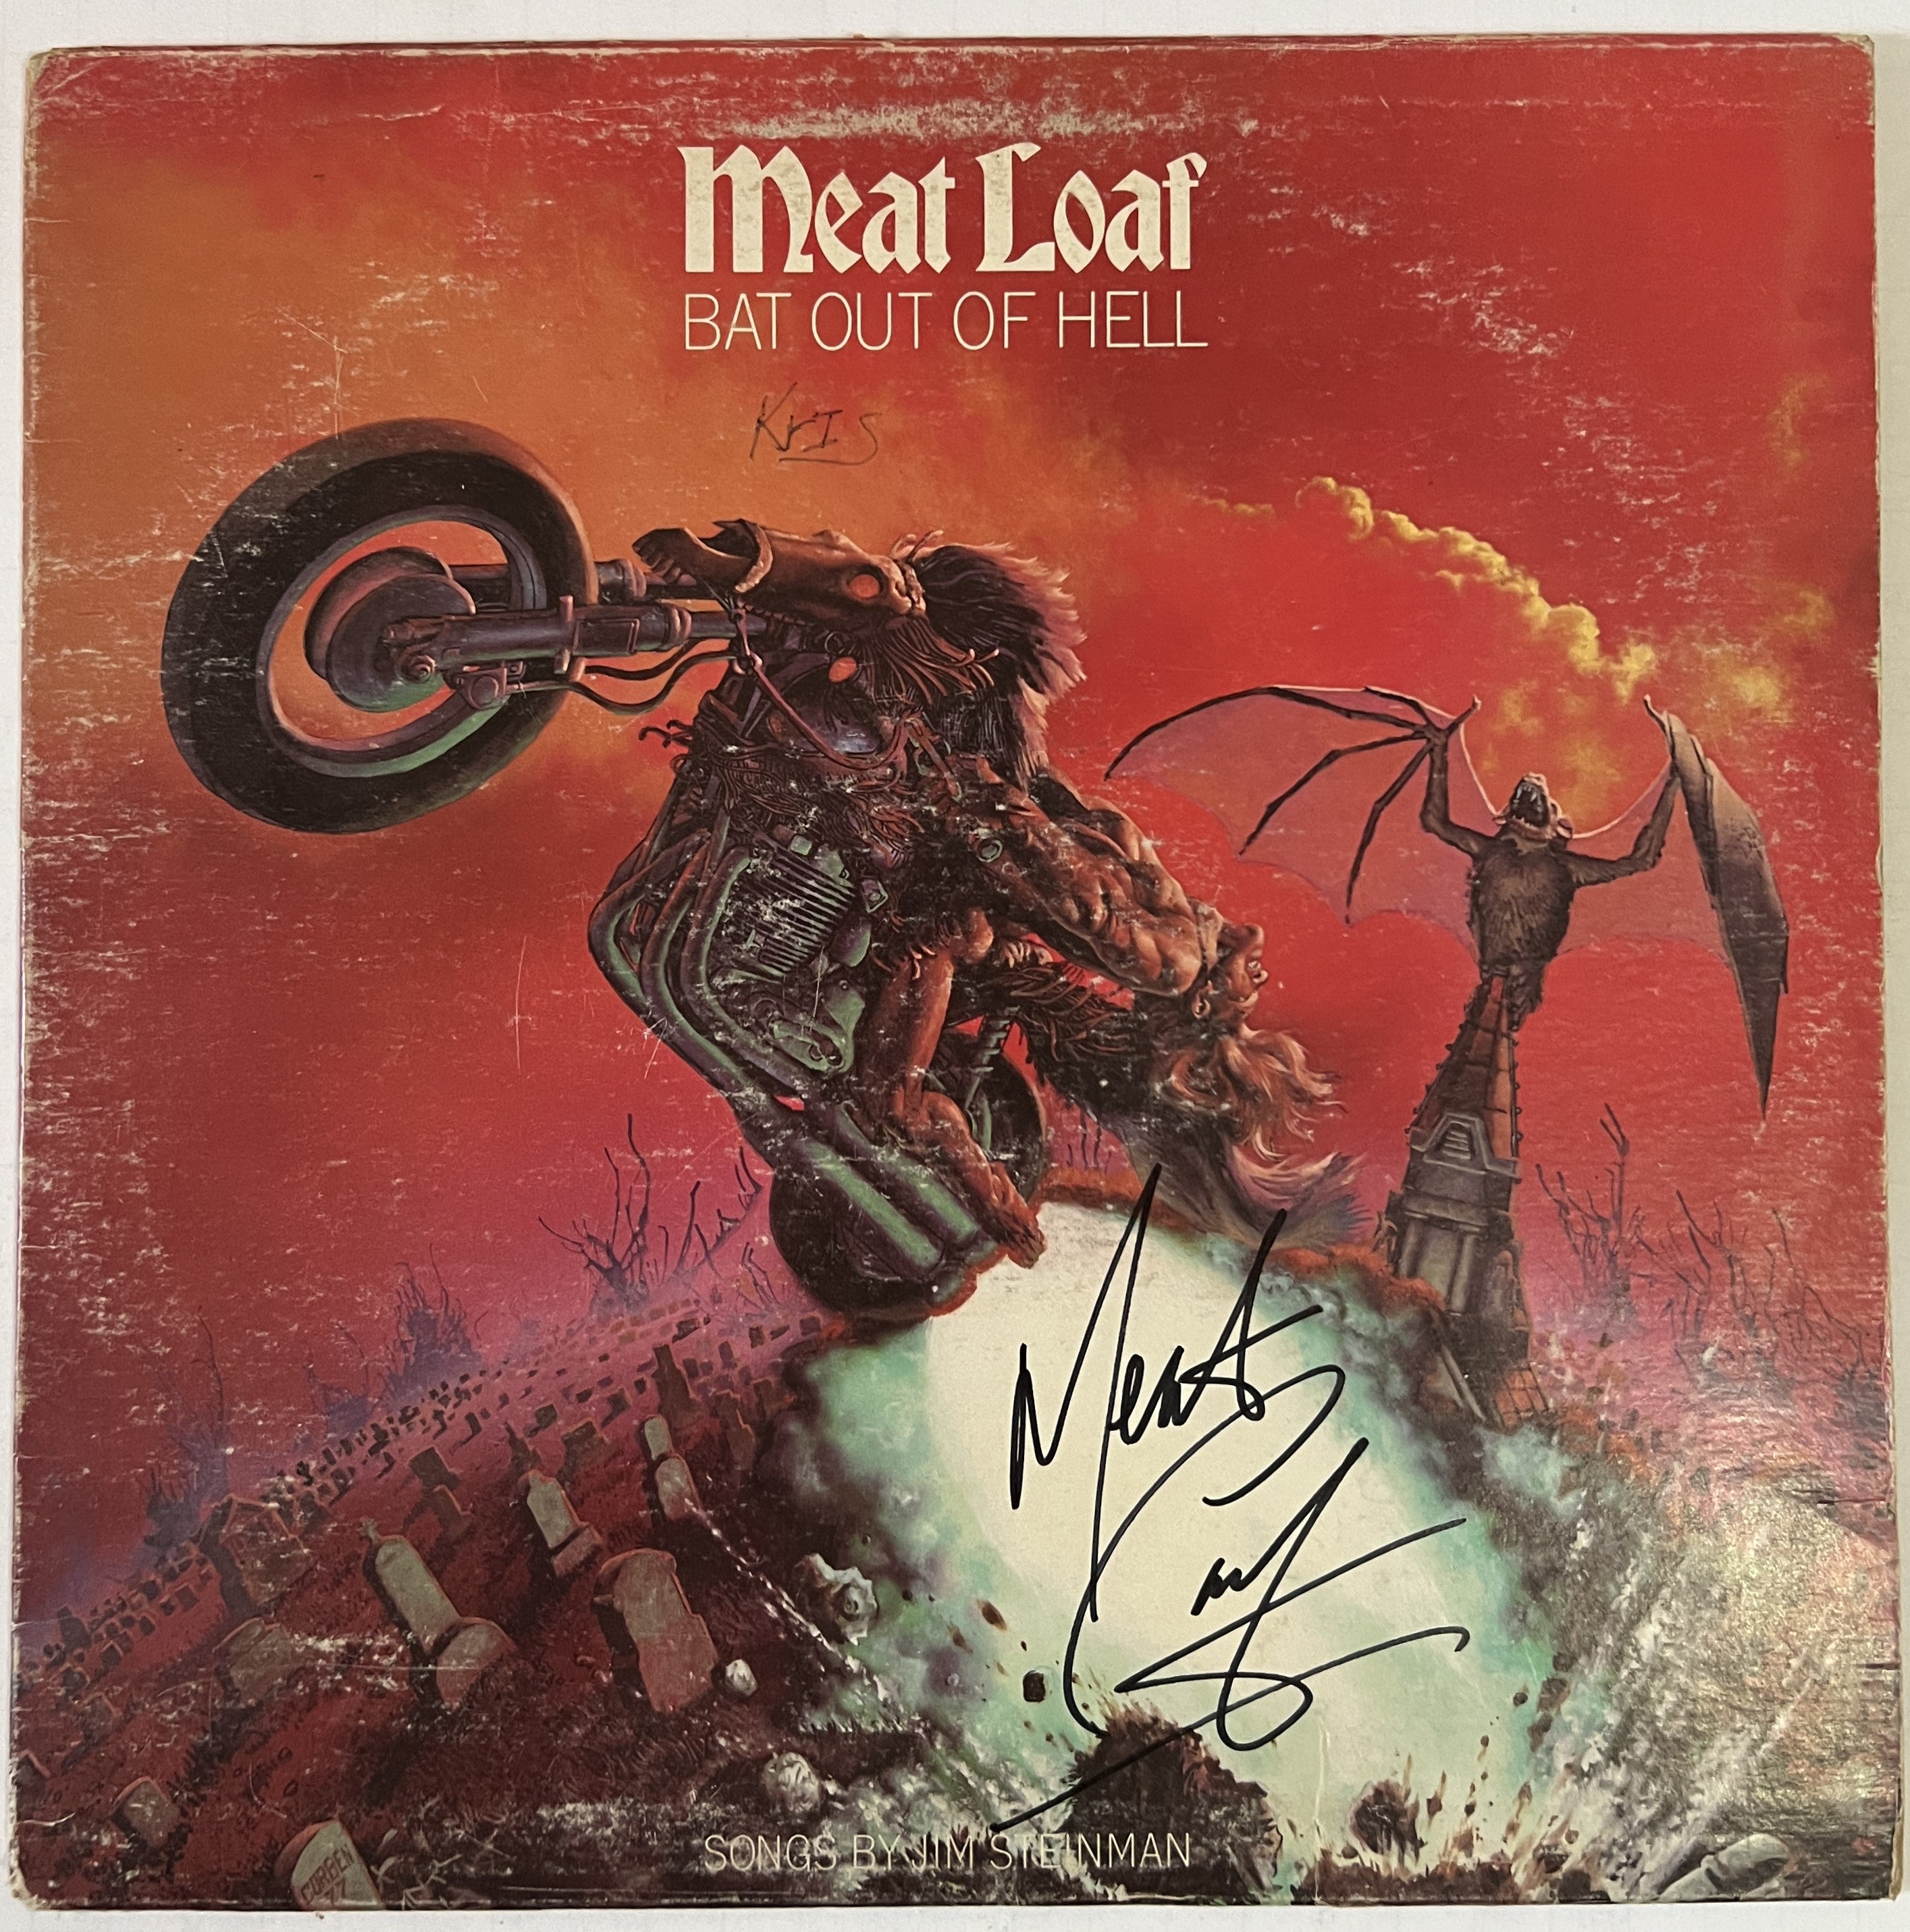 Michael Lee Aday "Meat Loaf" Bat out Hell LP signed with proof